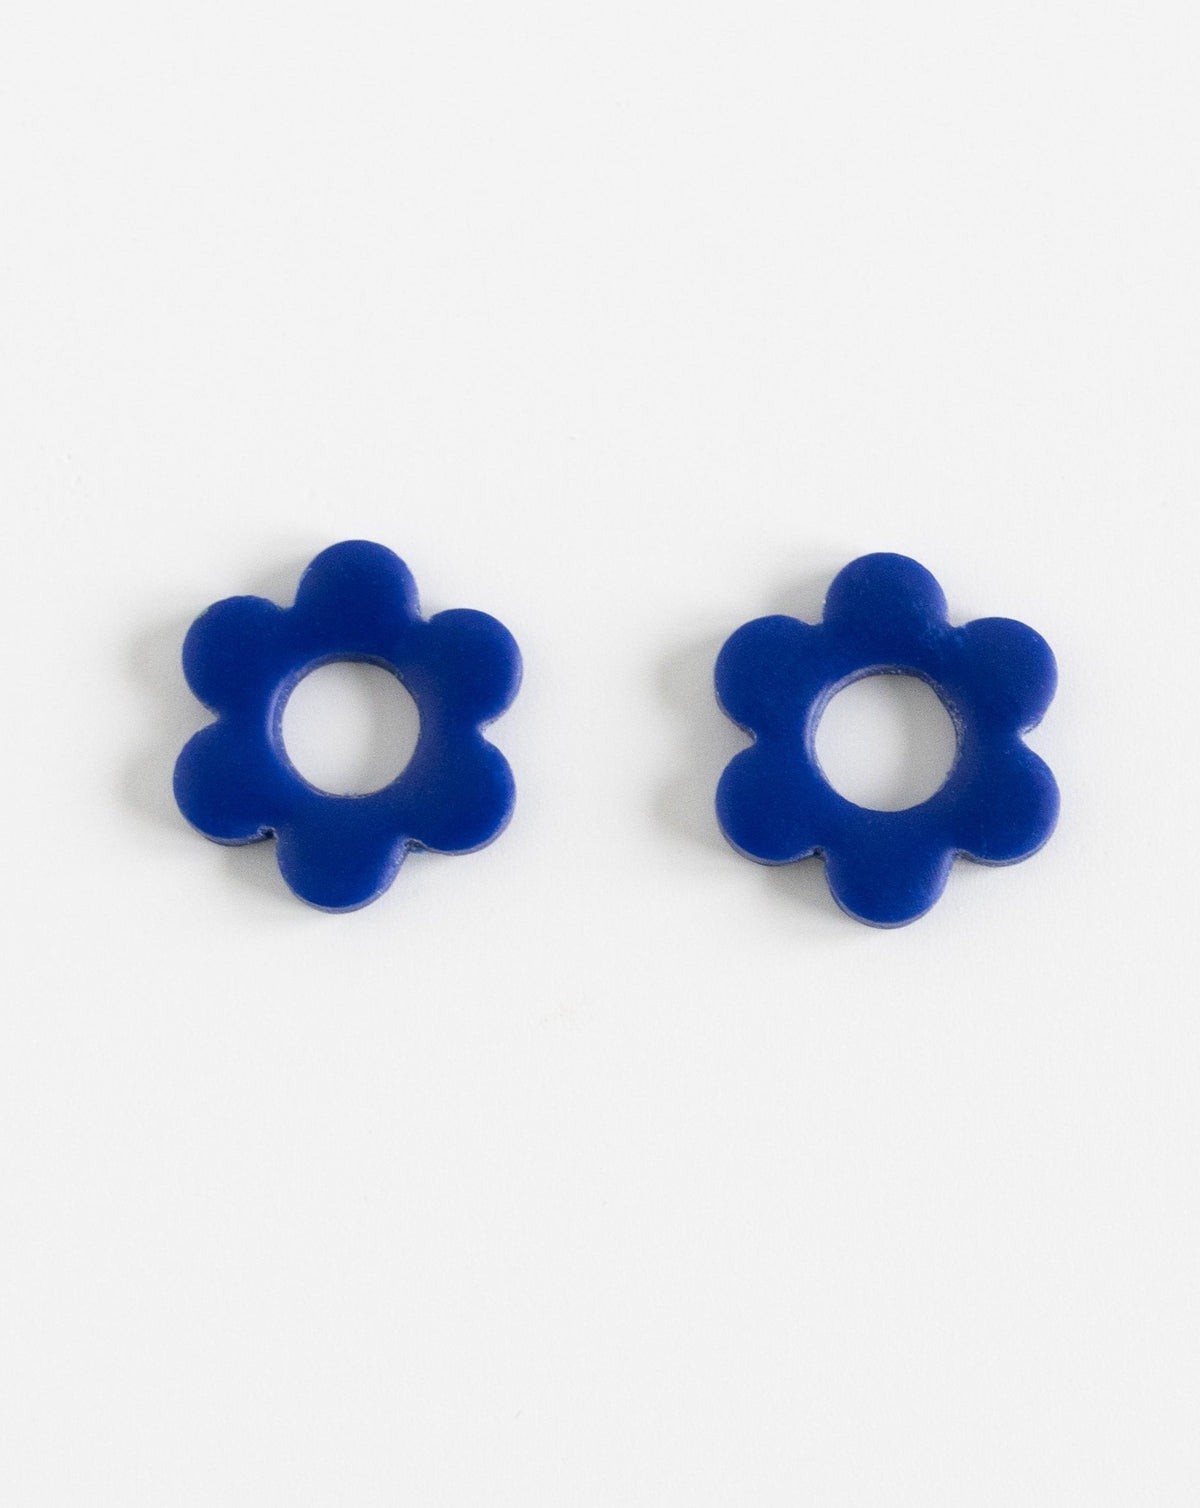 Close up of Goli Beads in Hue Blue color.